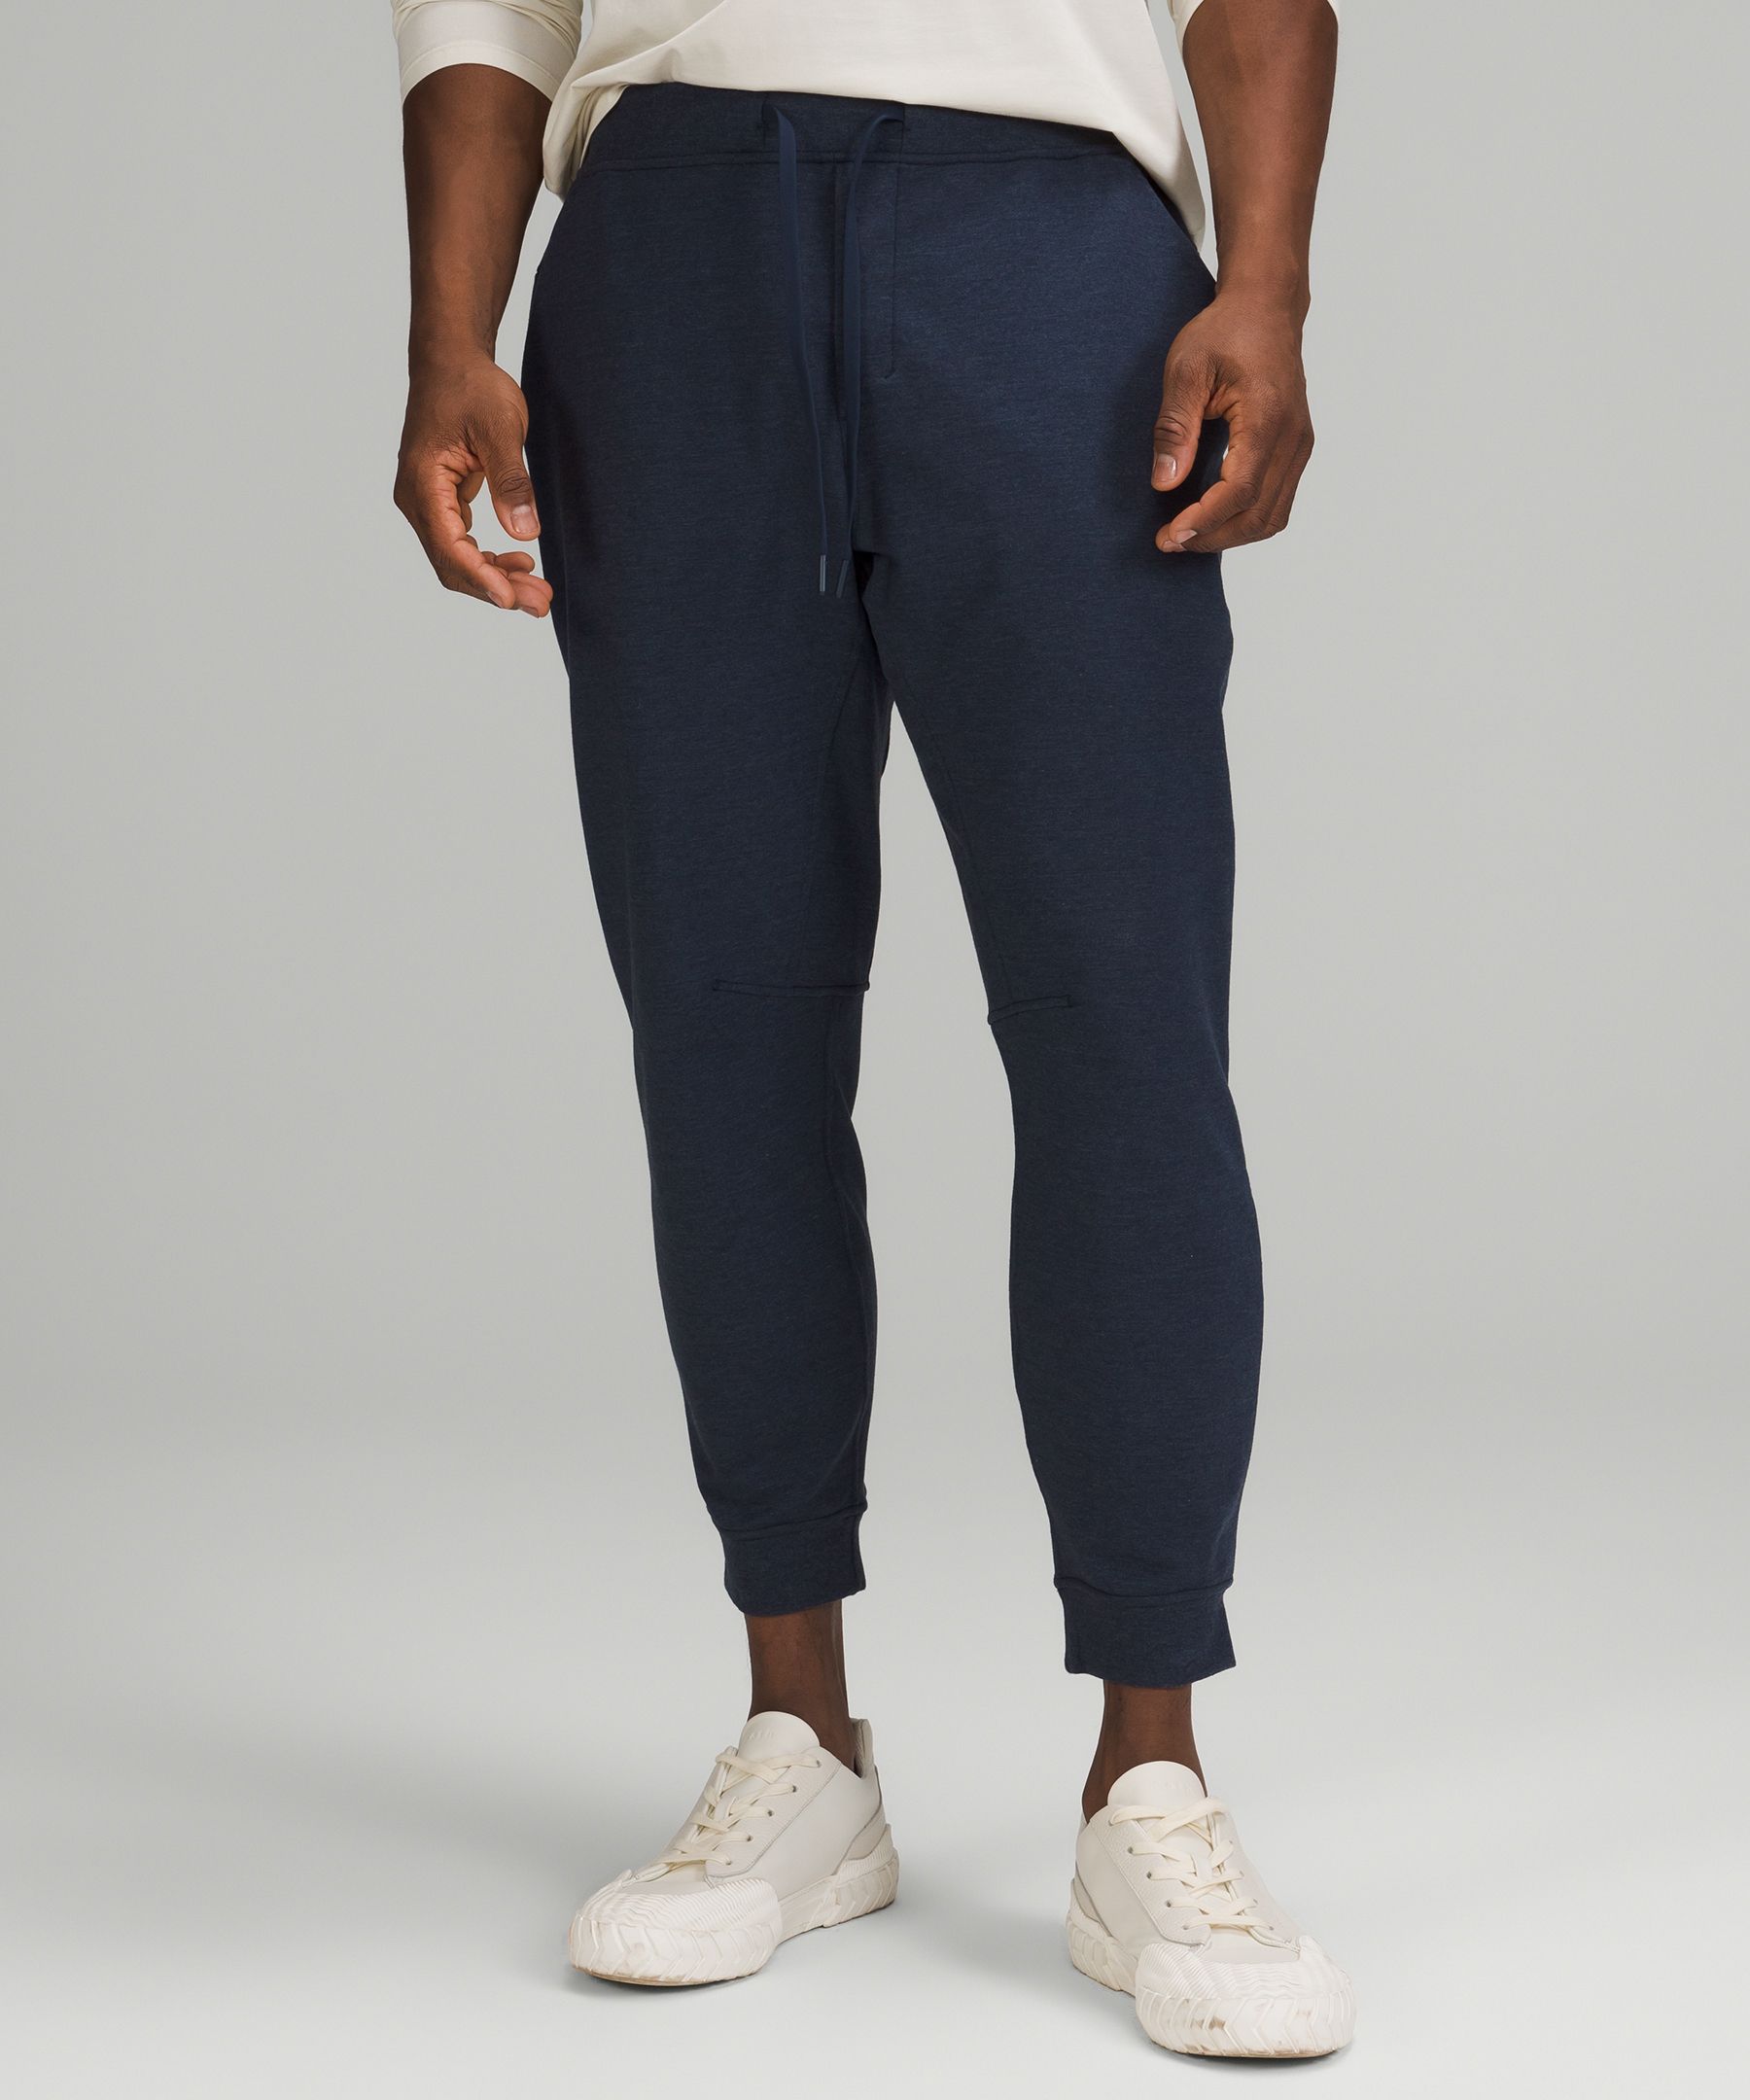 City Sweat Jogger Shorter 27 *French Terry